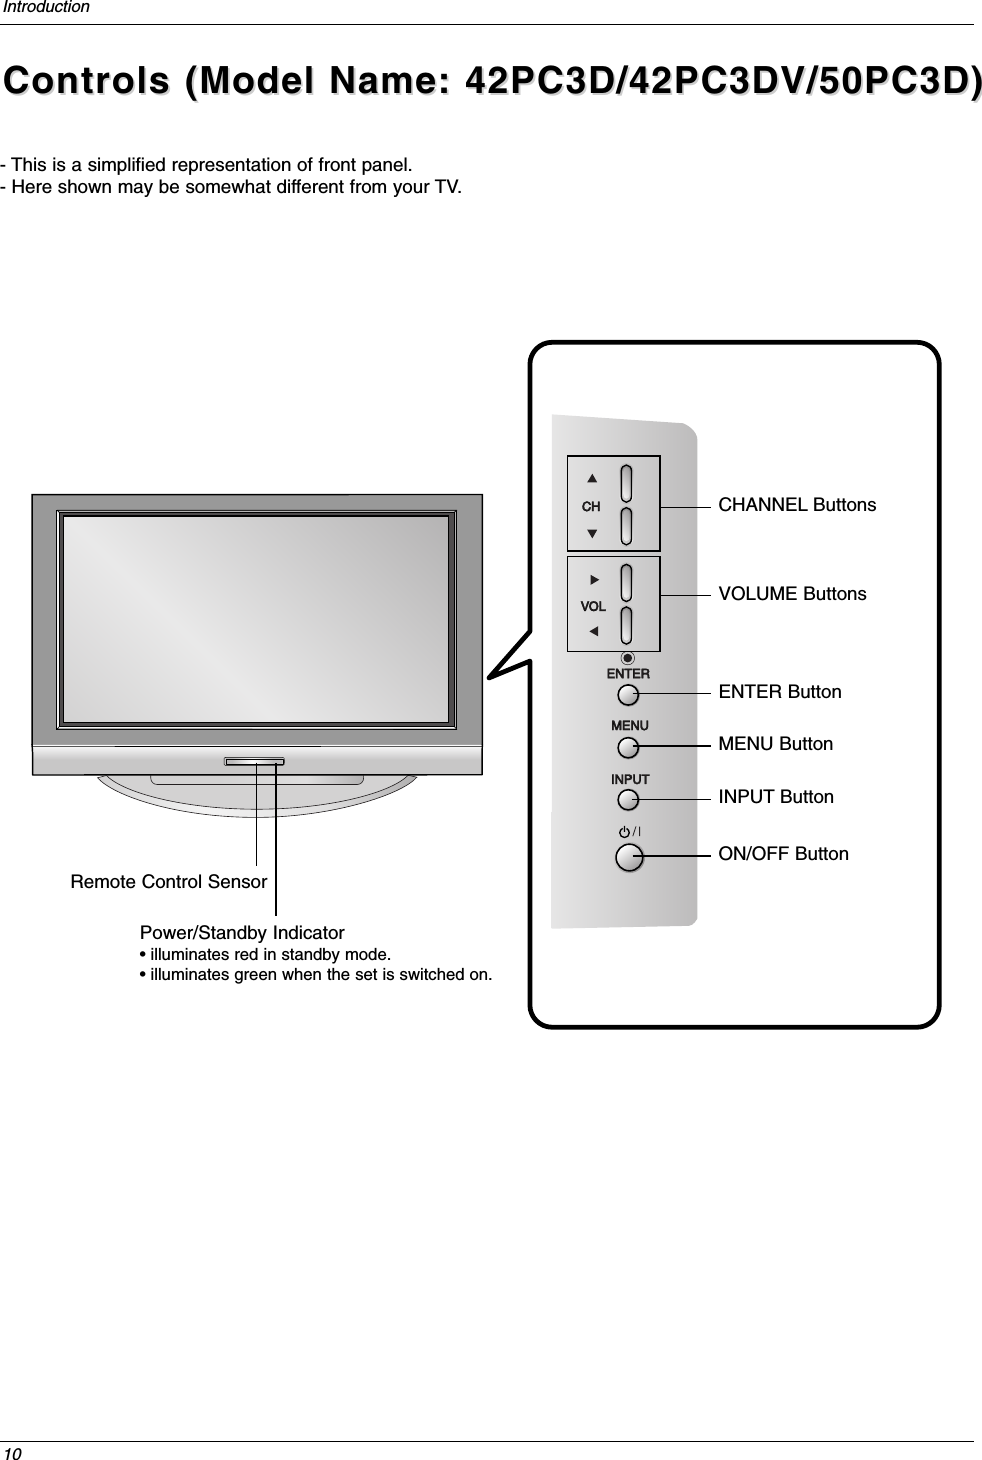 10IntroductionControls Controls (Model Name: 42PC3D/42PC3DV/50PC3D) (Model Name: 42PC3D/42PC3DV/50PC3D) - This is a simplified representation of front panel. - Here shown may be somewhat different from your TV.CHVOLENTERMENUINPUTON/OFFCHANNEL ButtonsVOLUME ButtonsENTER ButtonMENU ButtonINPUT ButtonON/OFF ButtonRemote Control SensorPower/Standby Indicator• illuminates red in standby mode.• illuminates green when the set is switched on.